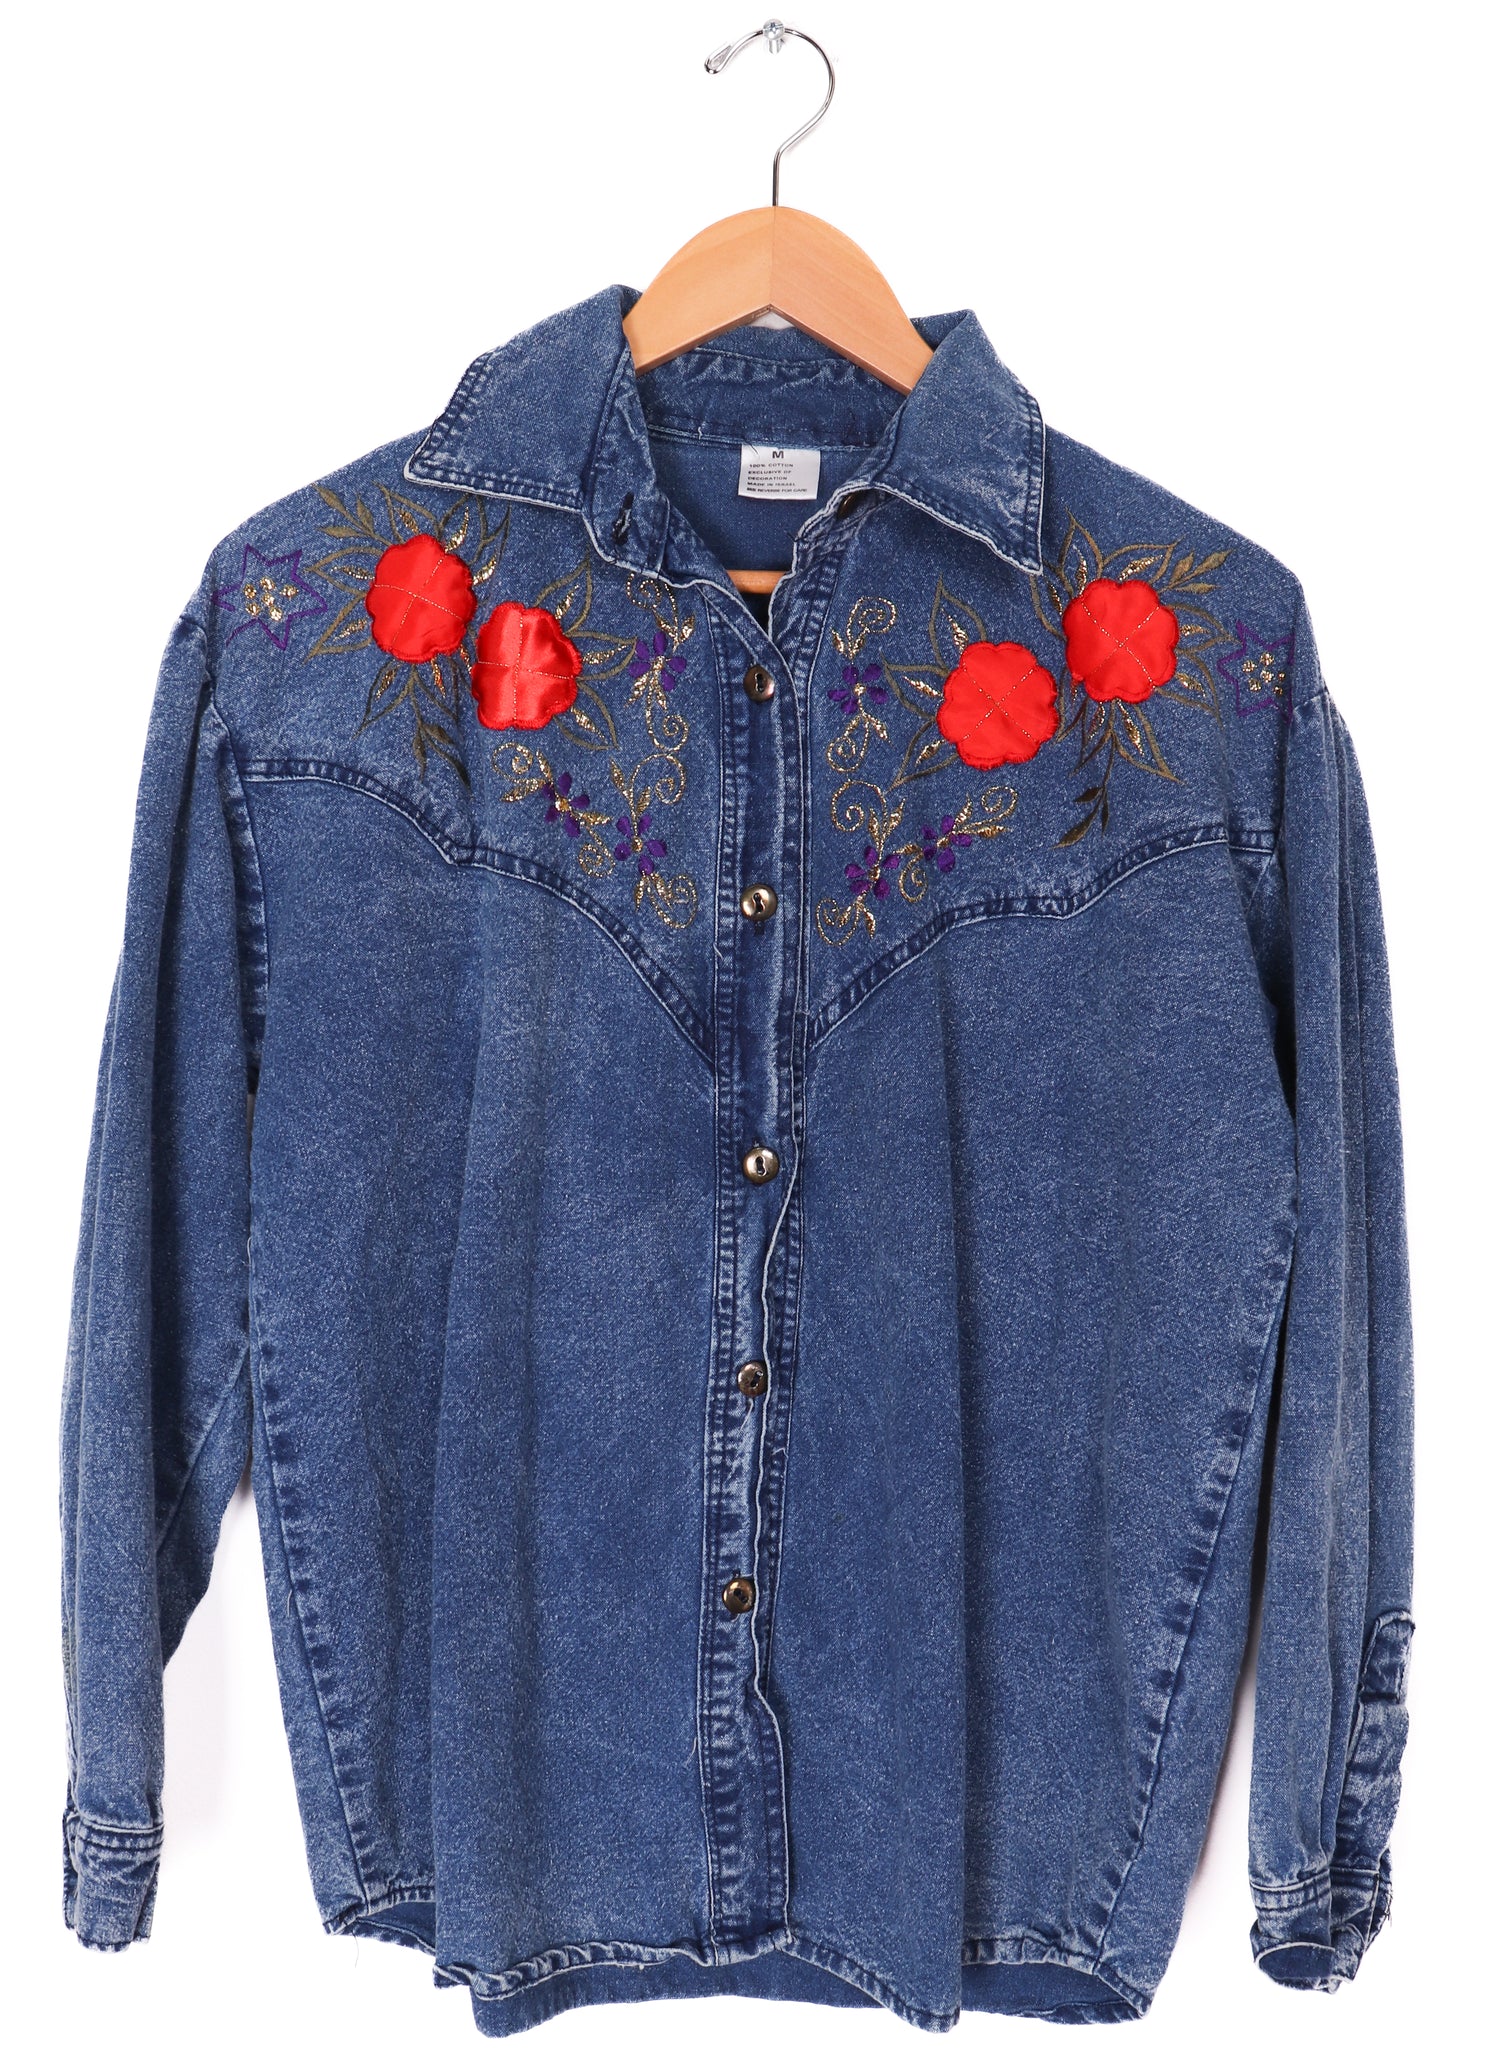 Vintage 90s Glittery Roses Denim Button Up